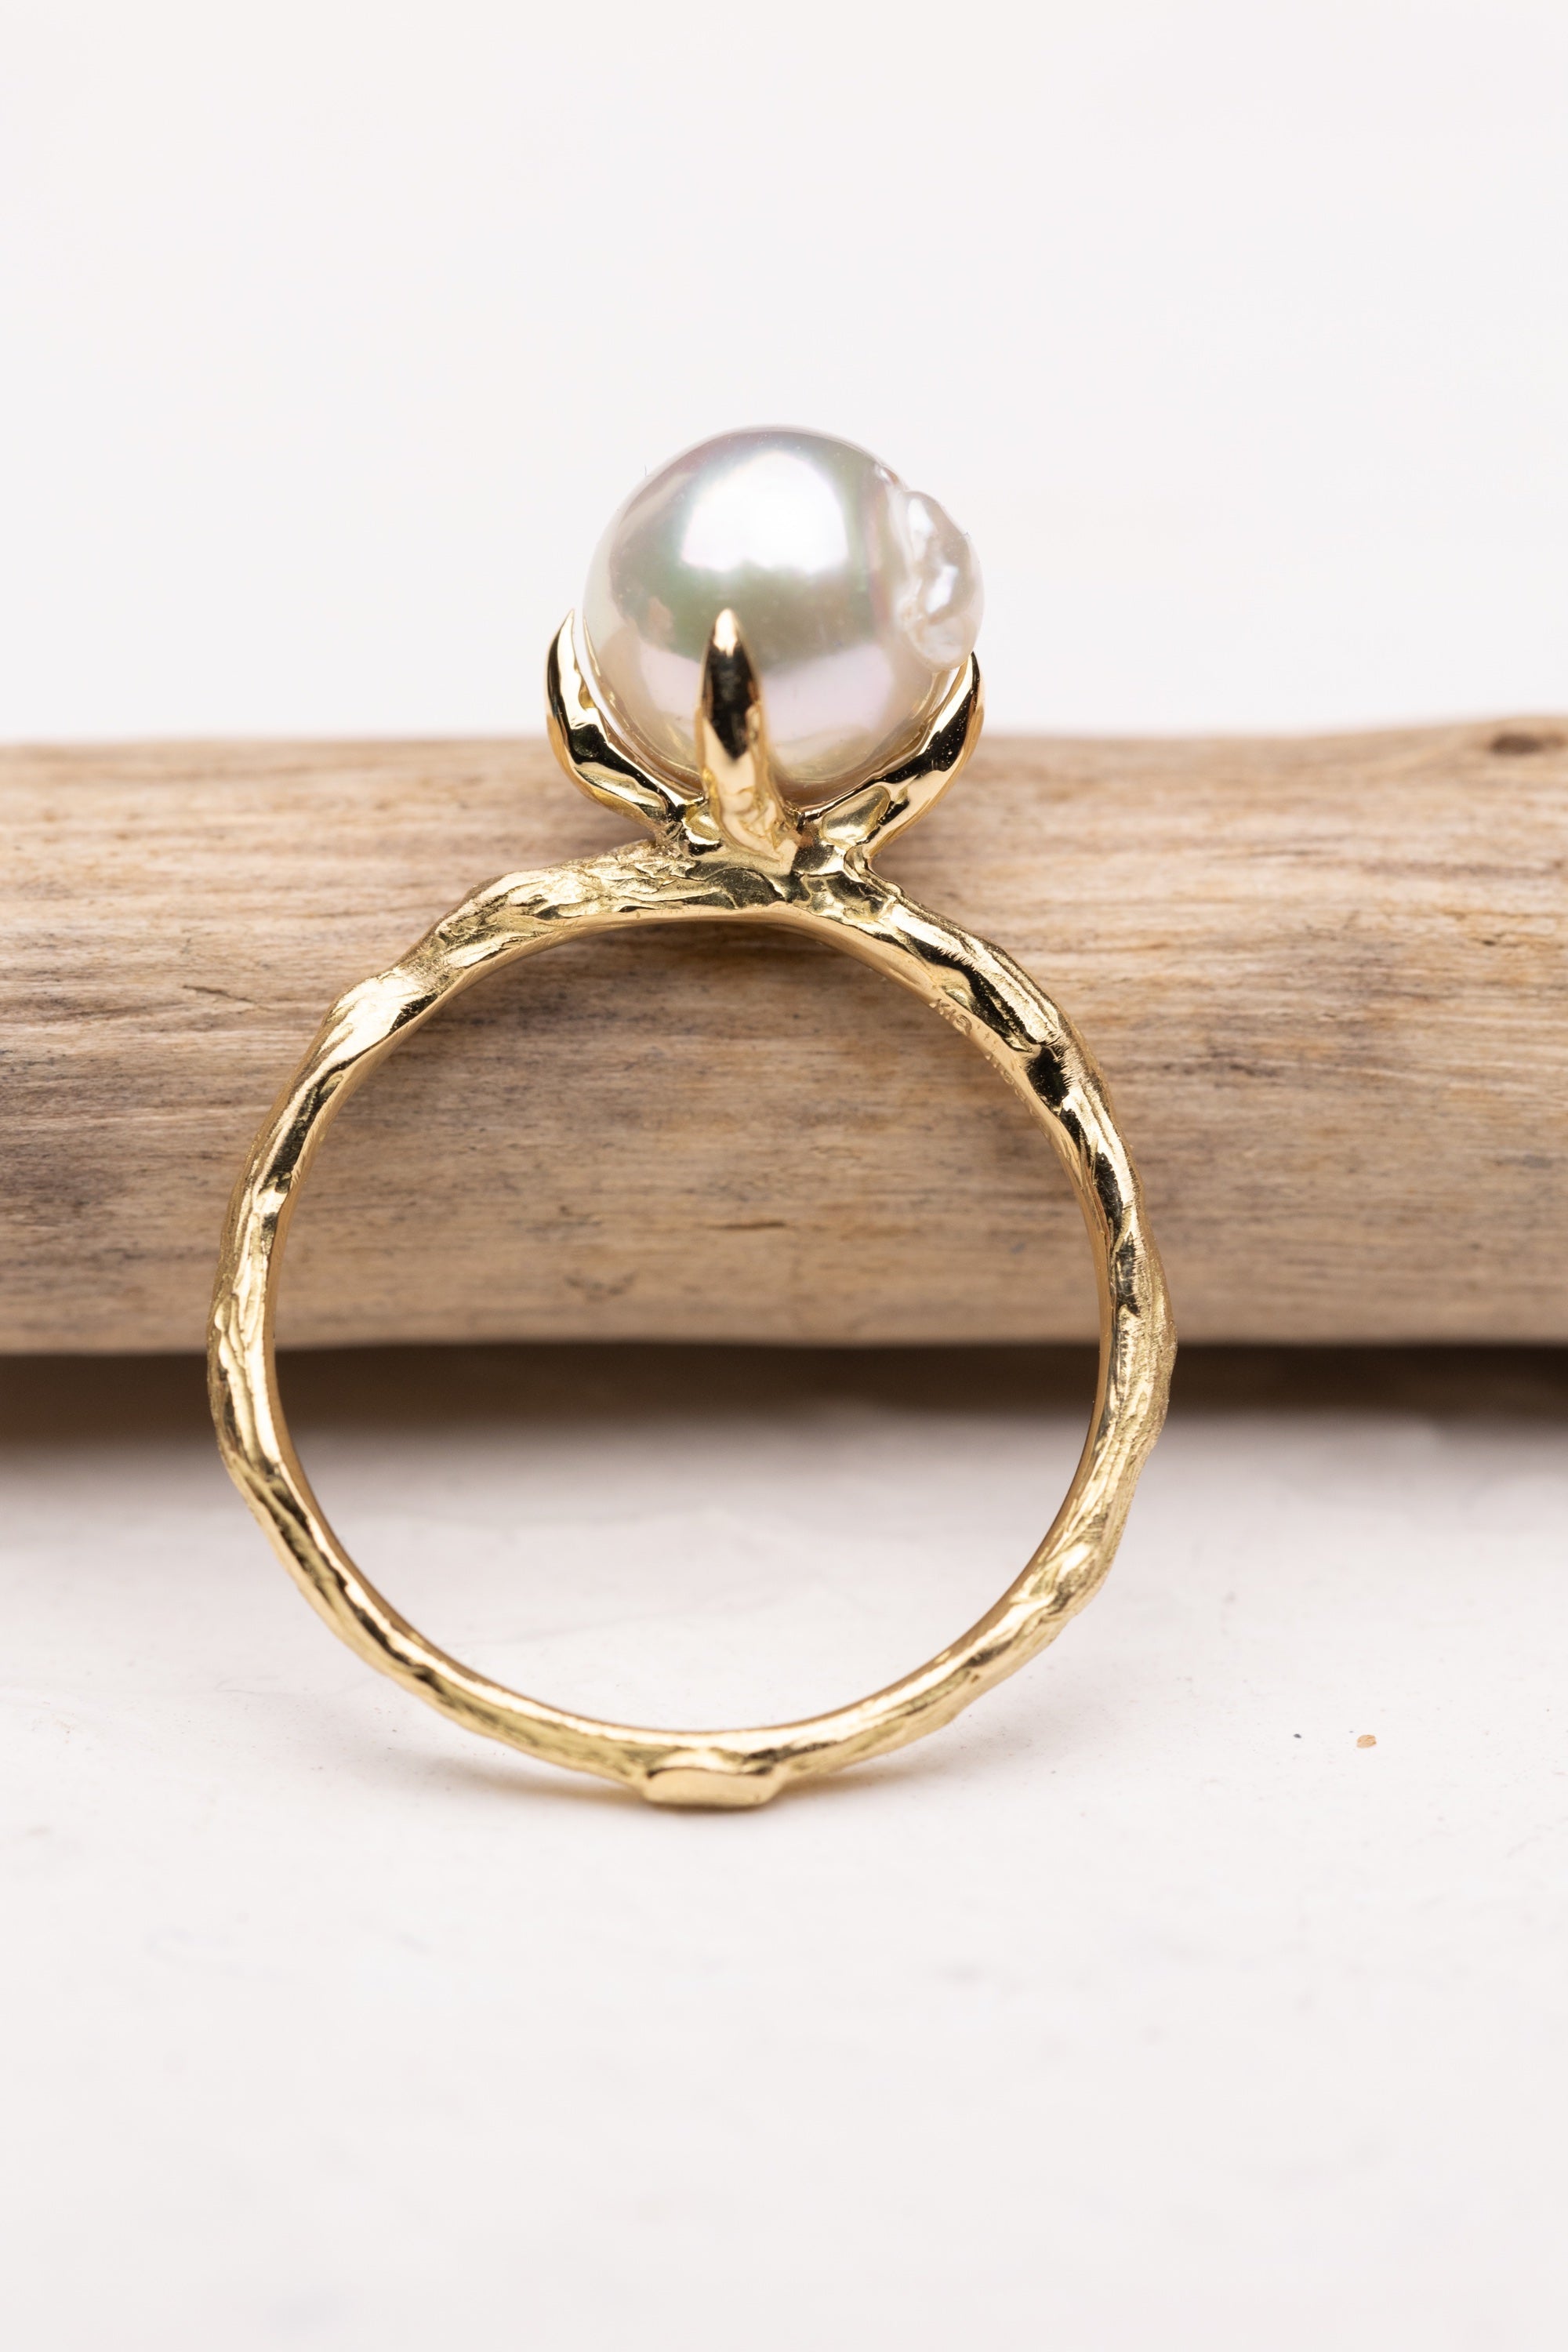 Branch | The Akoya Pearl Ring - Large (18k)